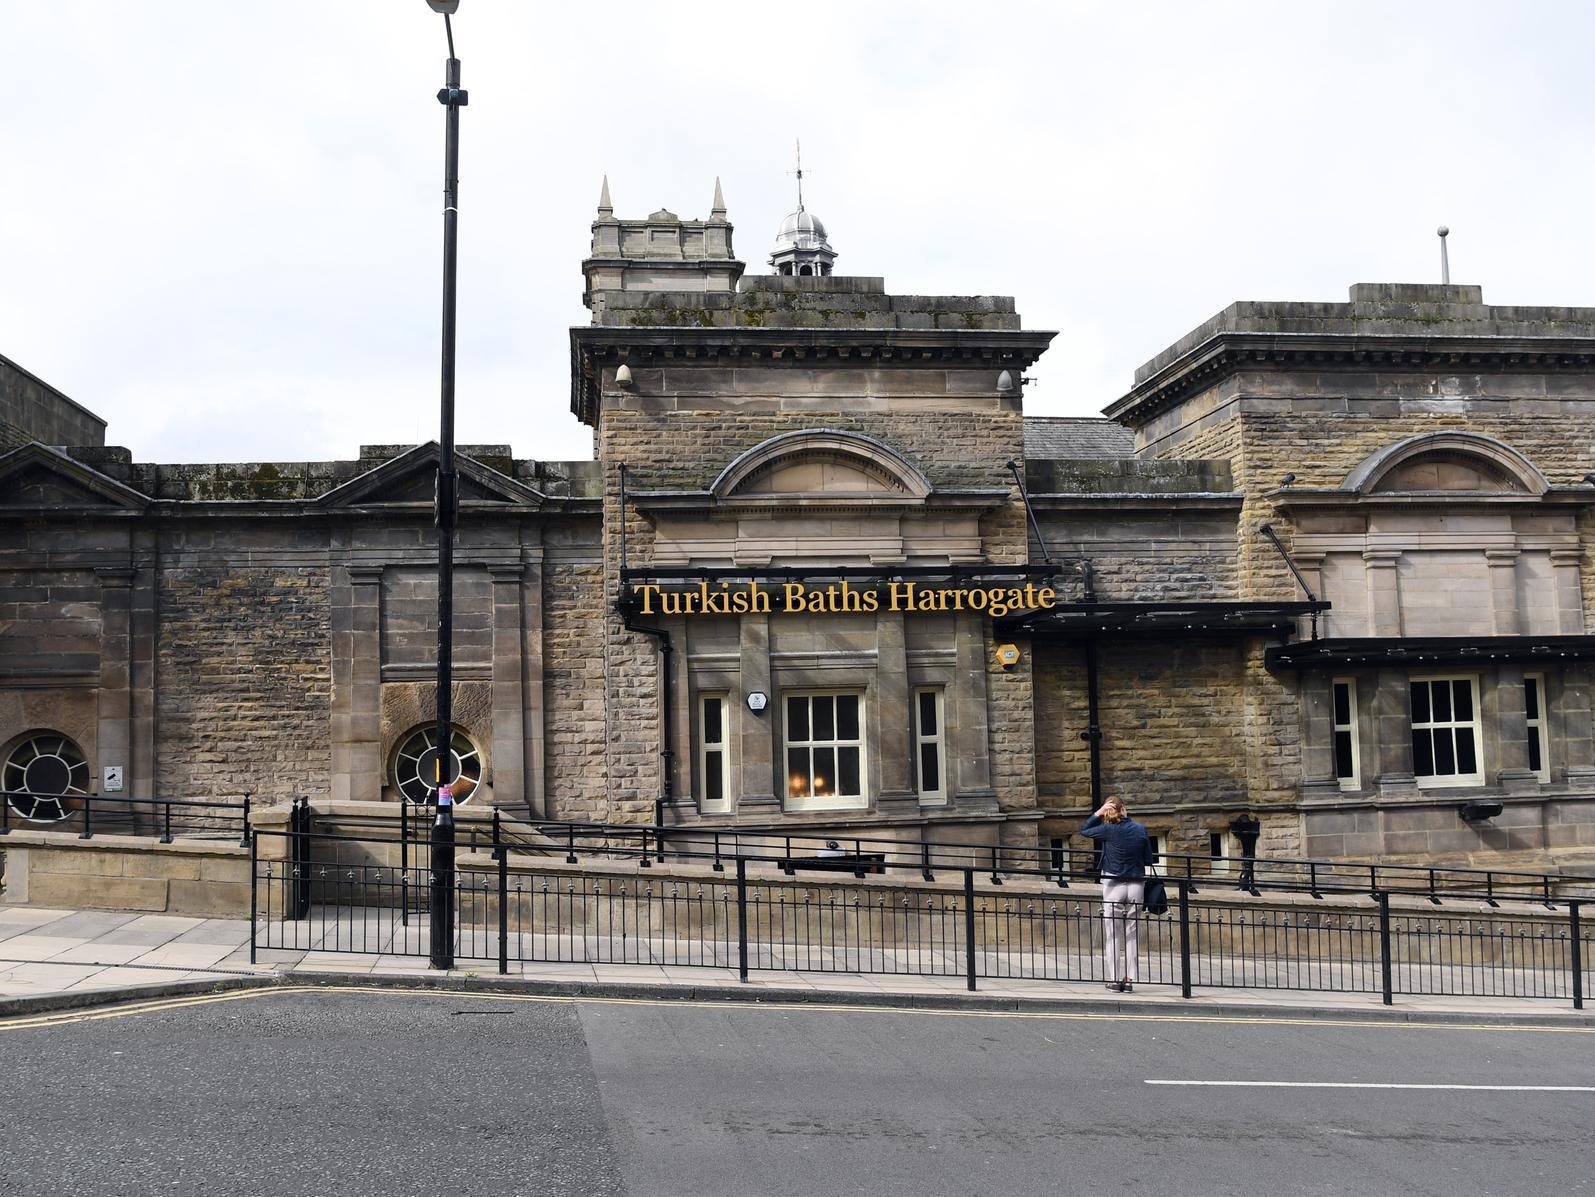 The Turkish Baths in Harrogate is one of the last working Turkish baths in the country, dating back to the 19th century.